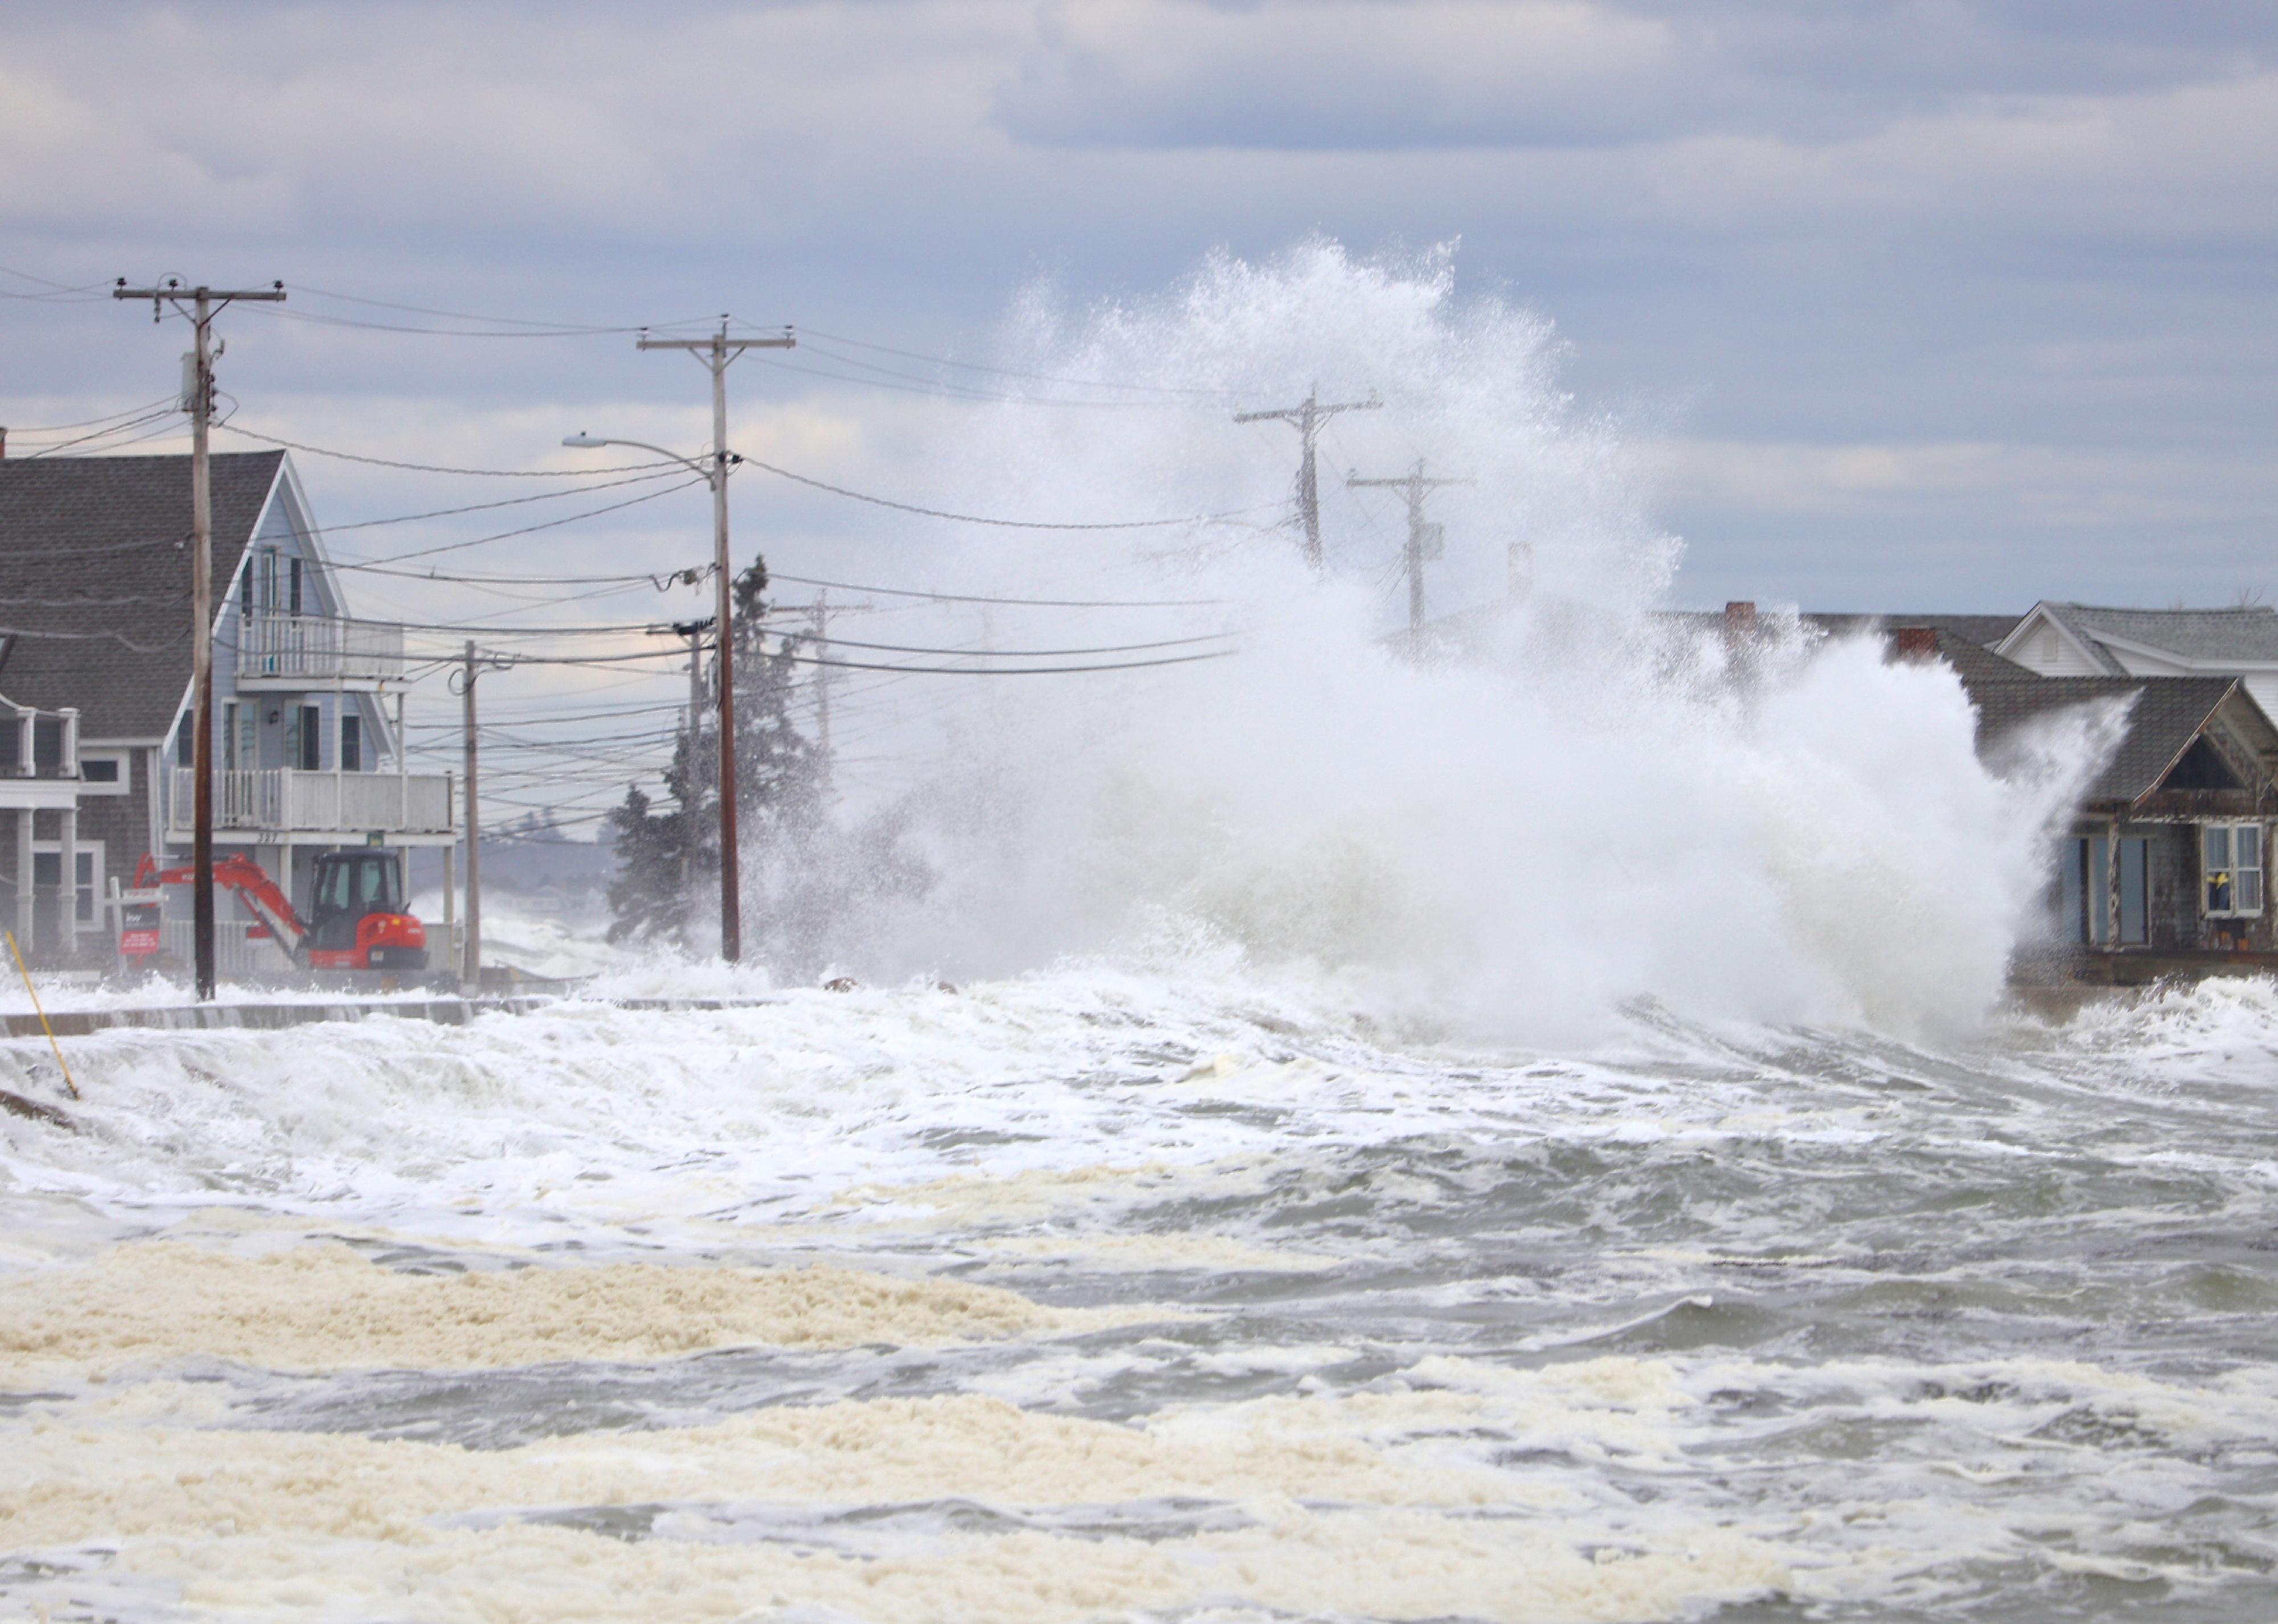 A storm wave crashes over two telephone poles and the roof of a beach front house.